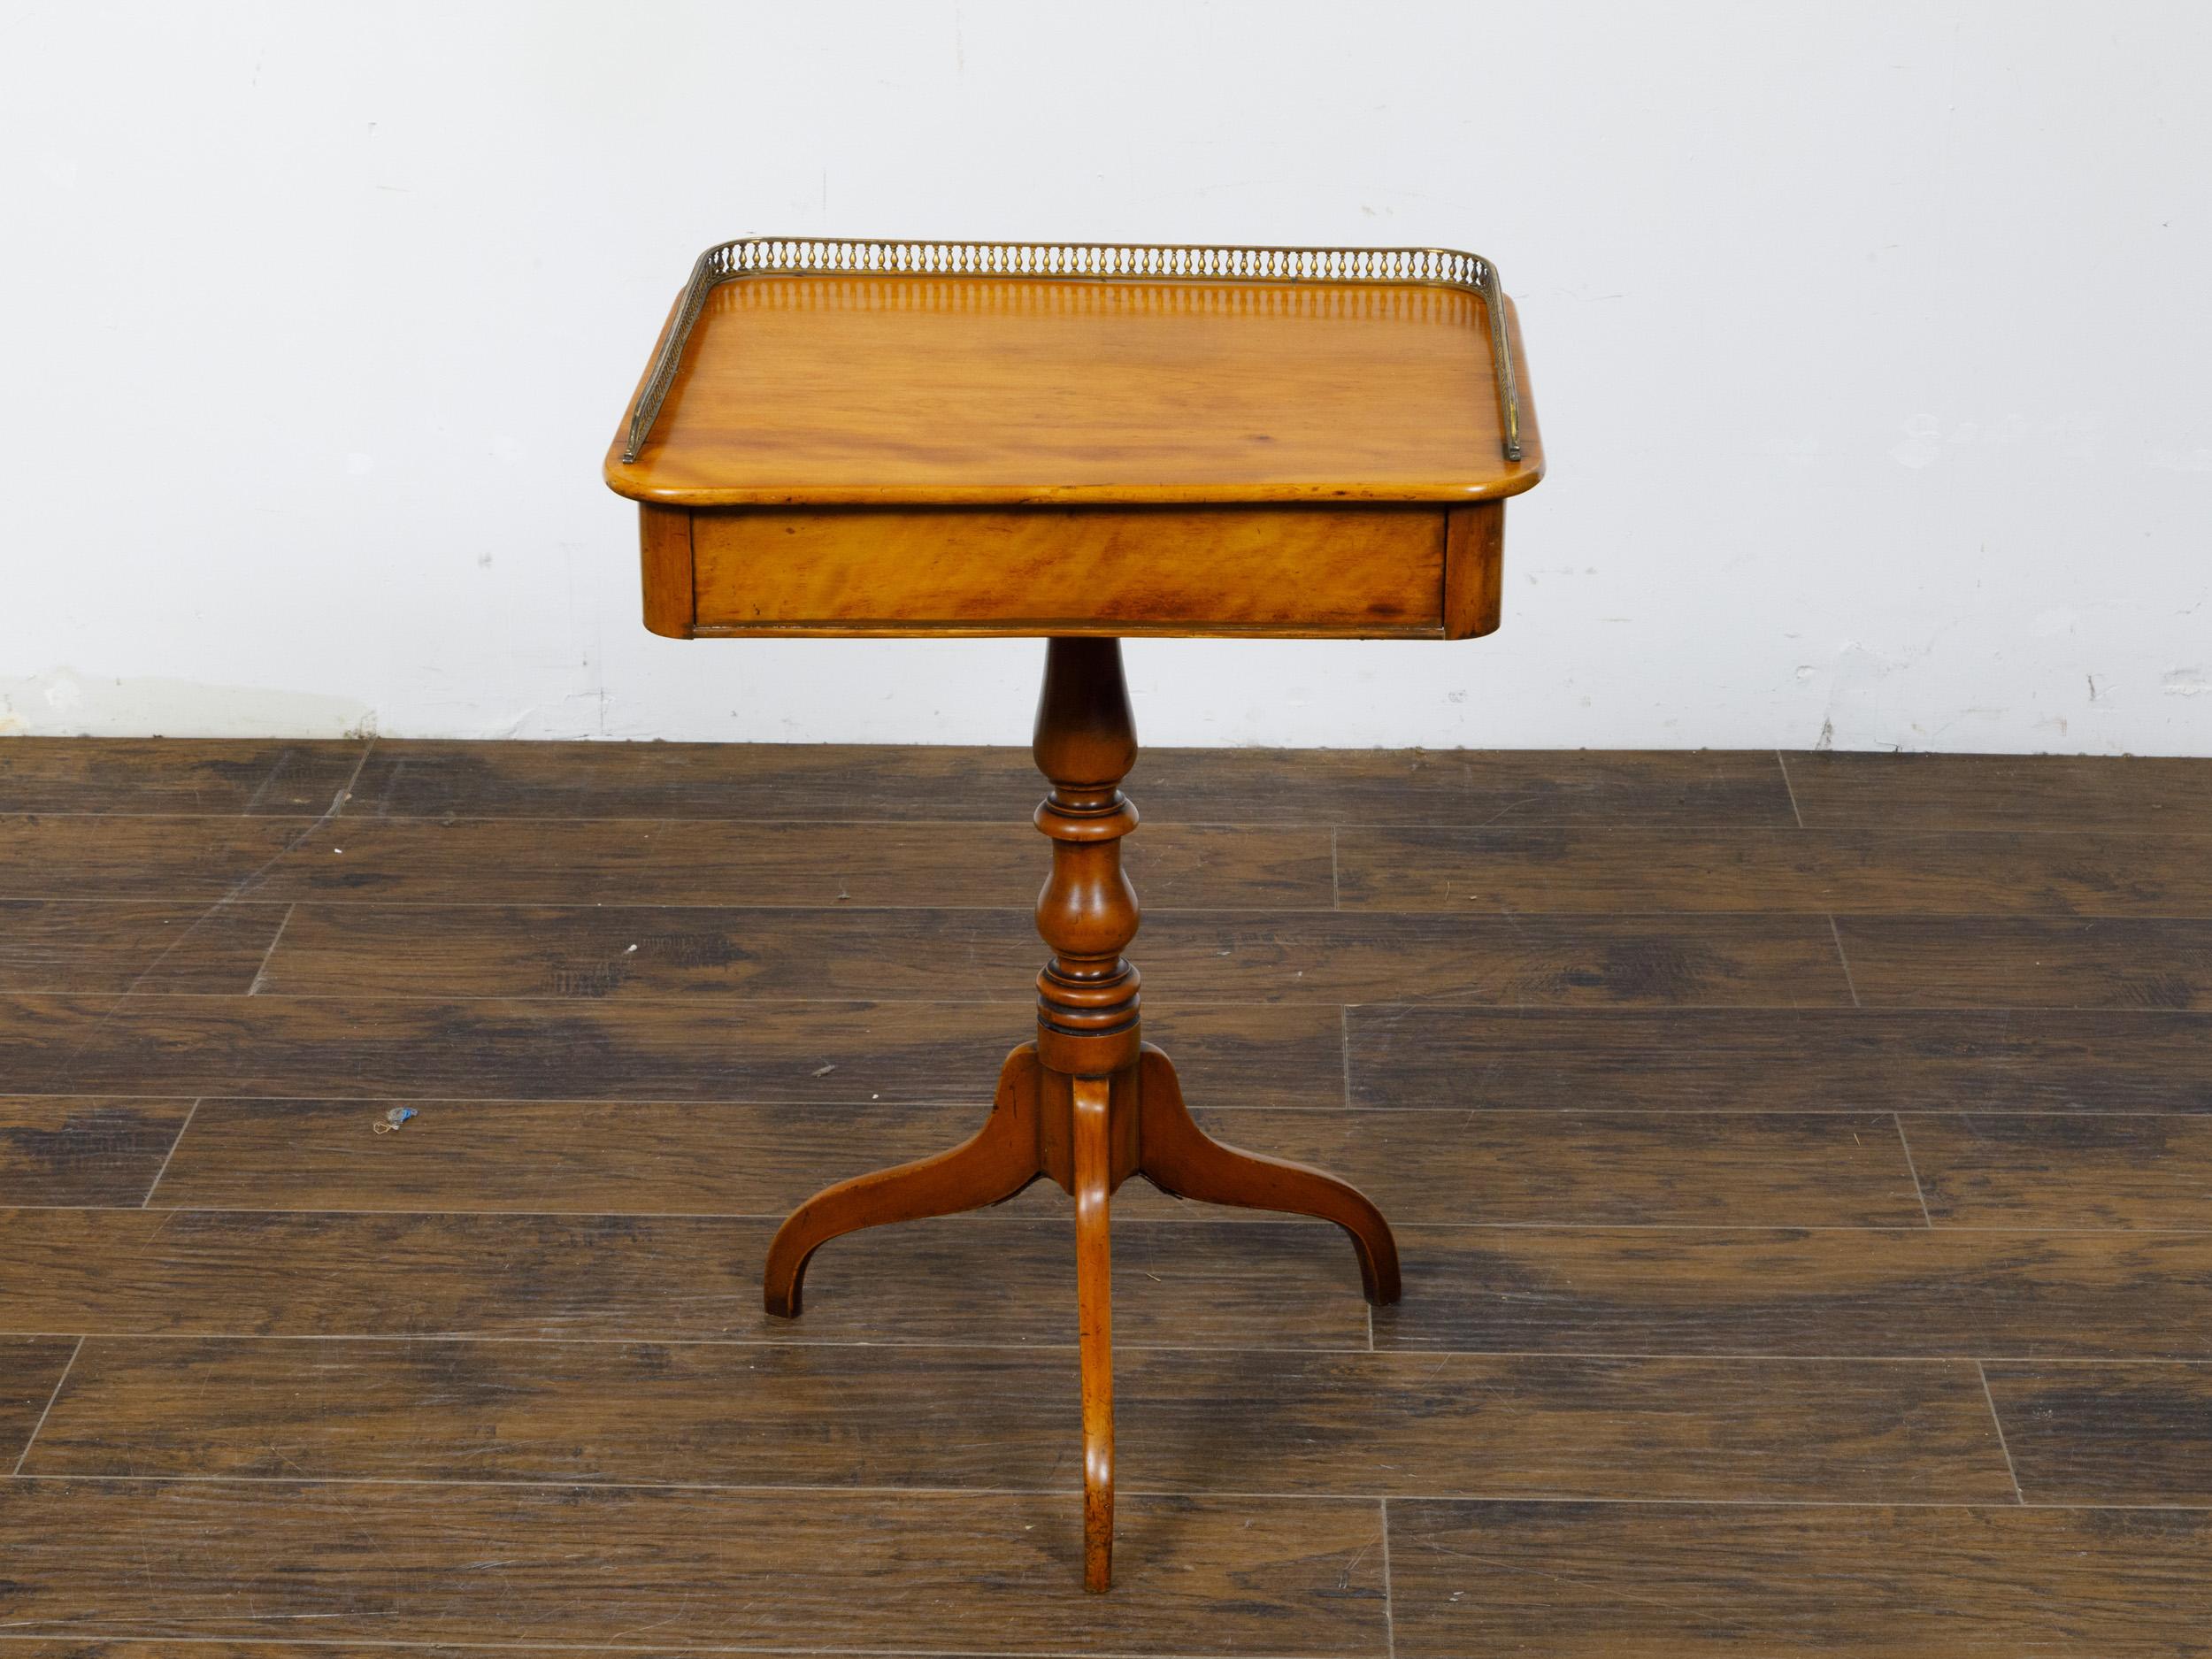 An English Regency period fruitwood guéridon side table from the 19th century with pierced brass three-quarter gallery, turned pedestal and tripod base. This exquisite English Regency period guéridon side table, dating back to the 19th century, is